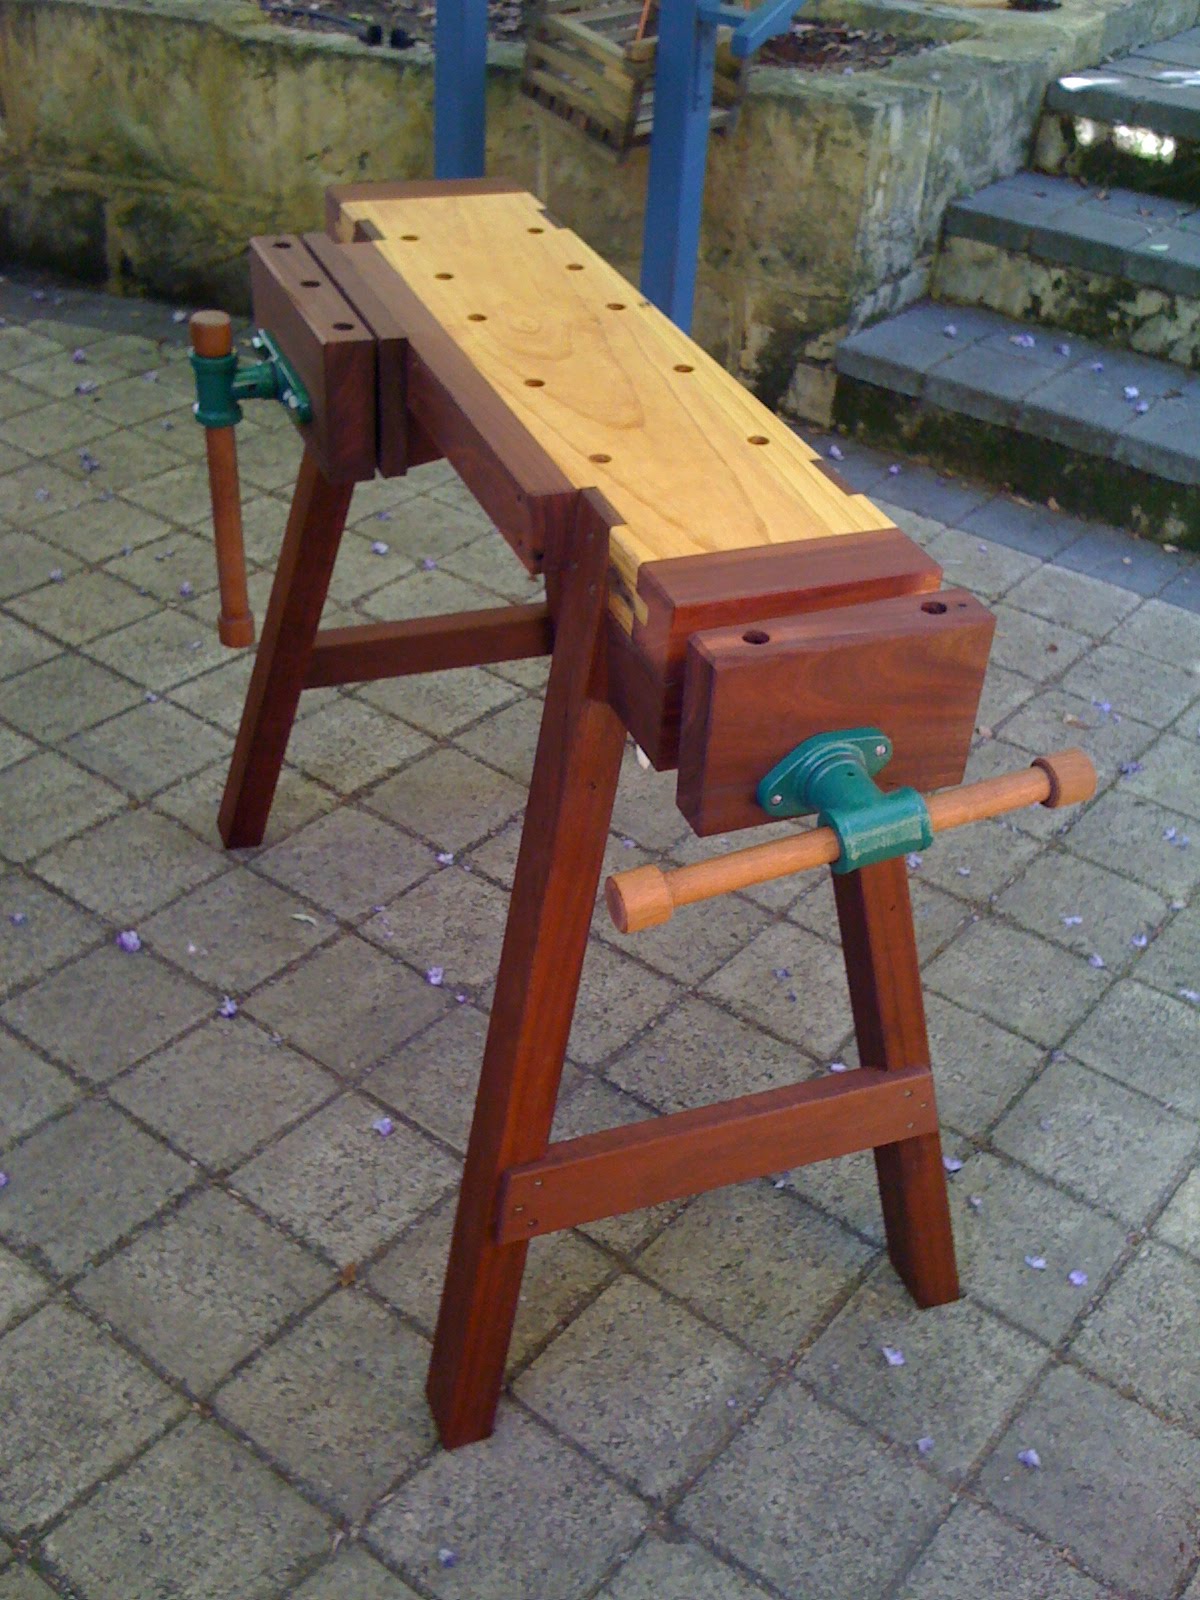 The Village Carpenter: More Traveling Benches